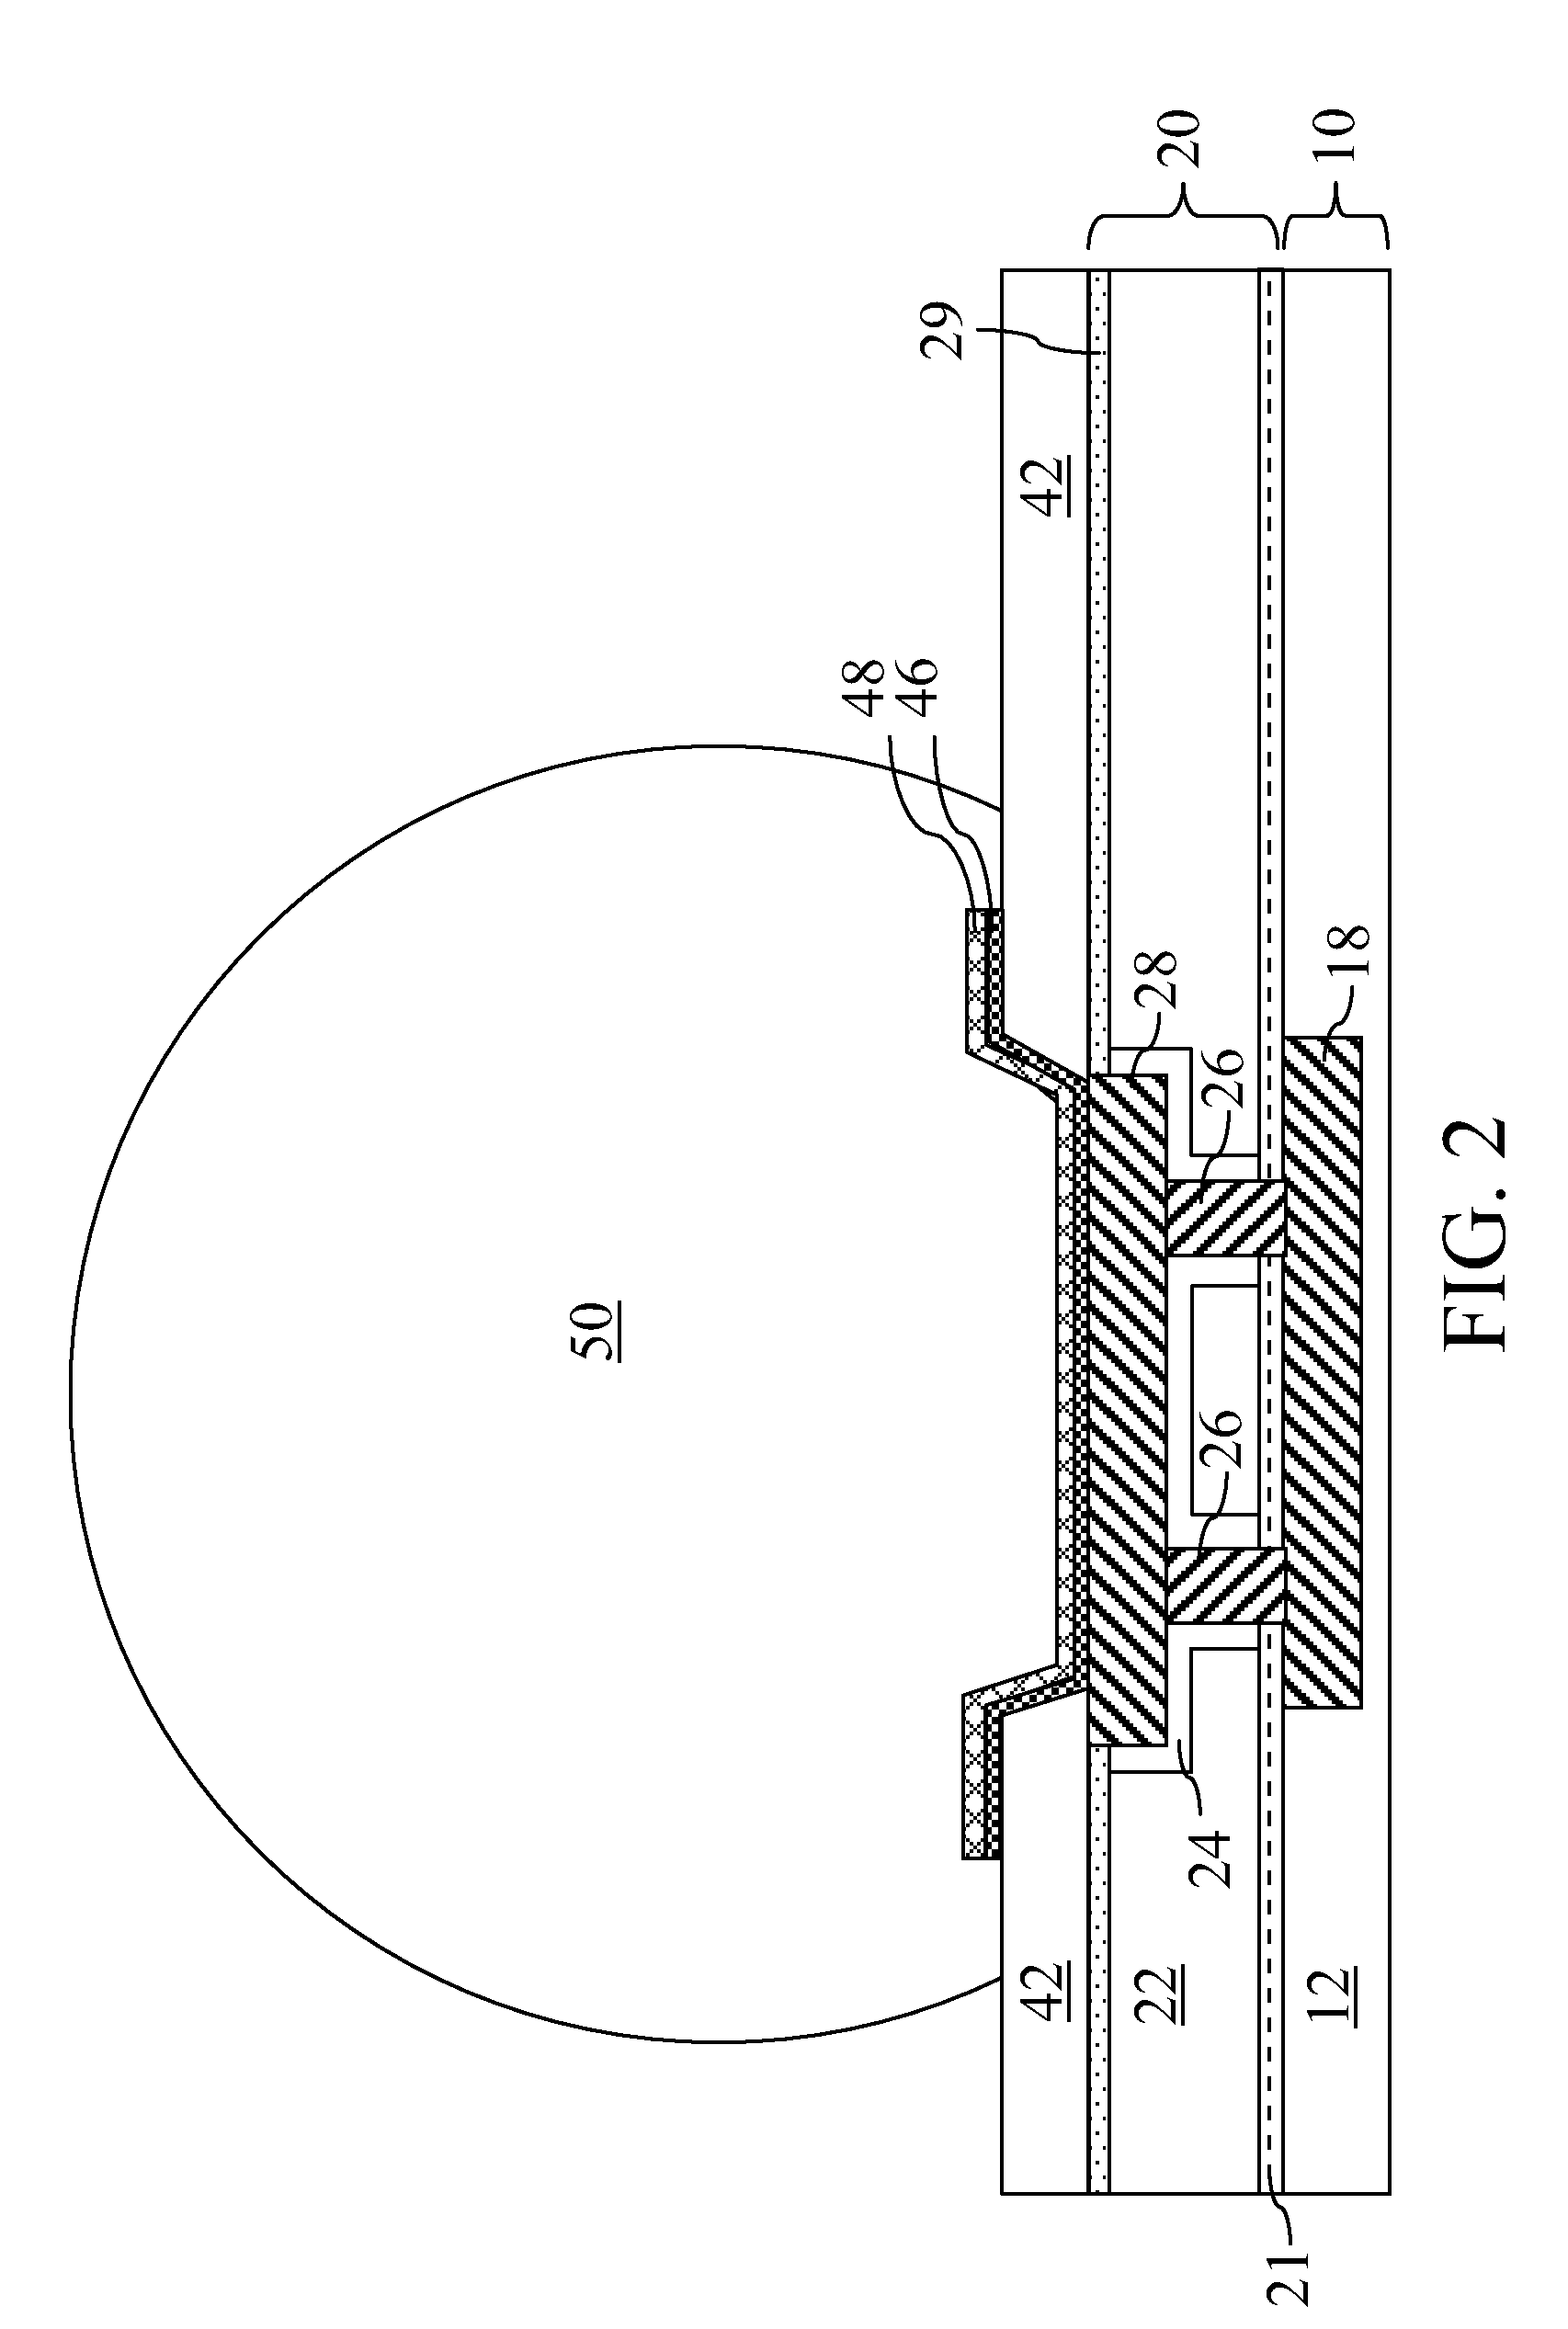 Fluorine depleted adhesion layer for metal interconnect structure